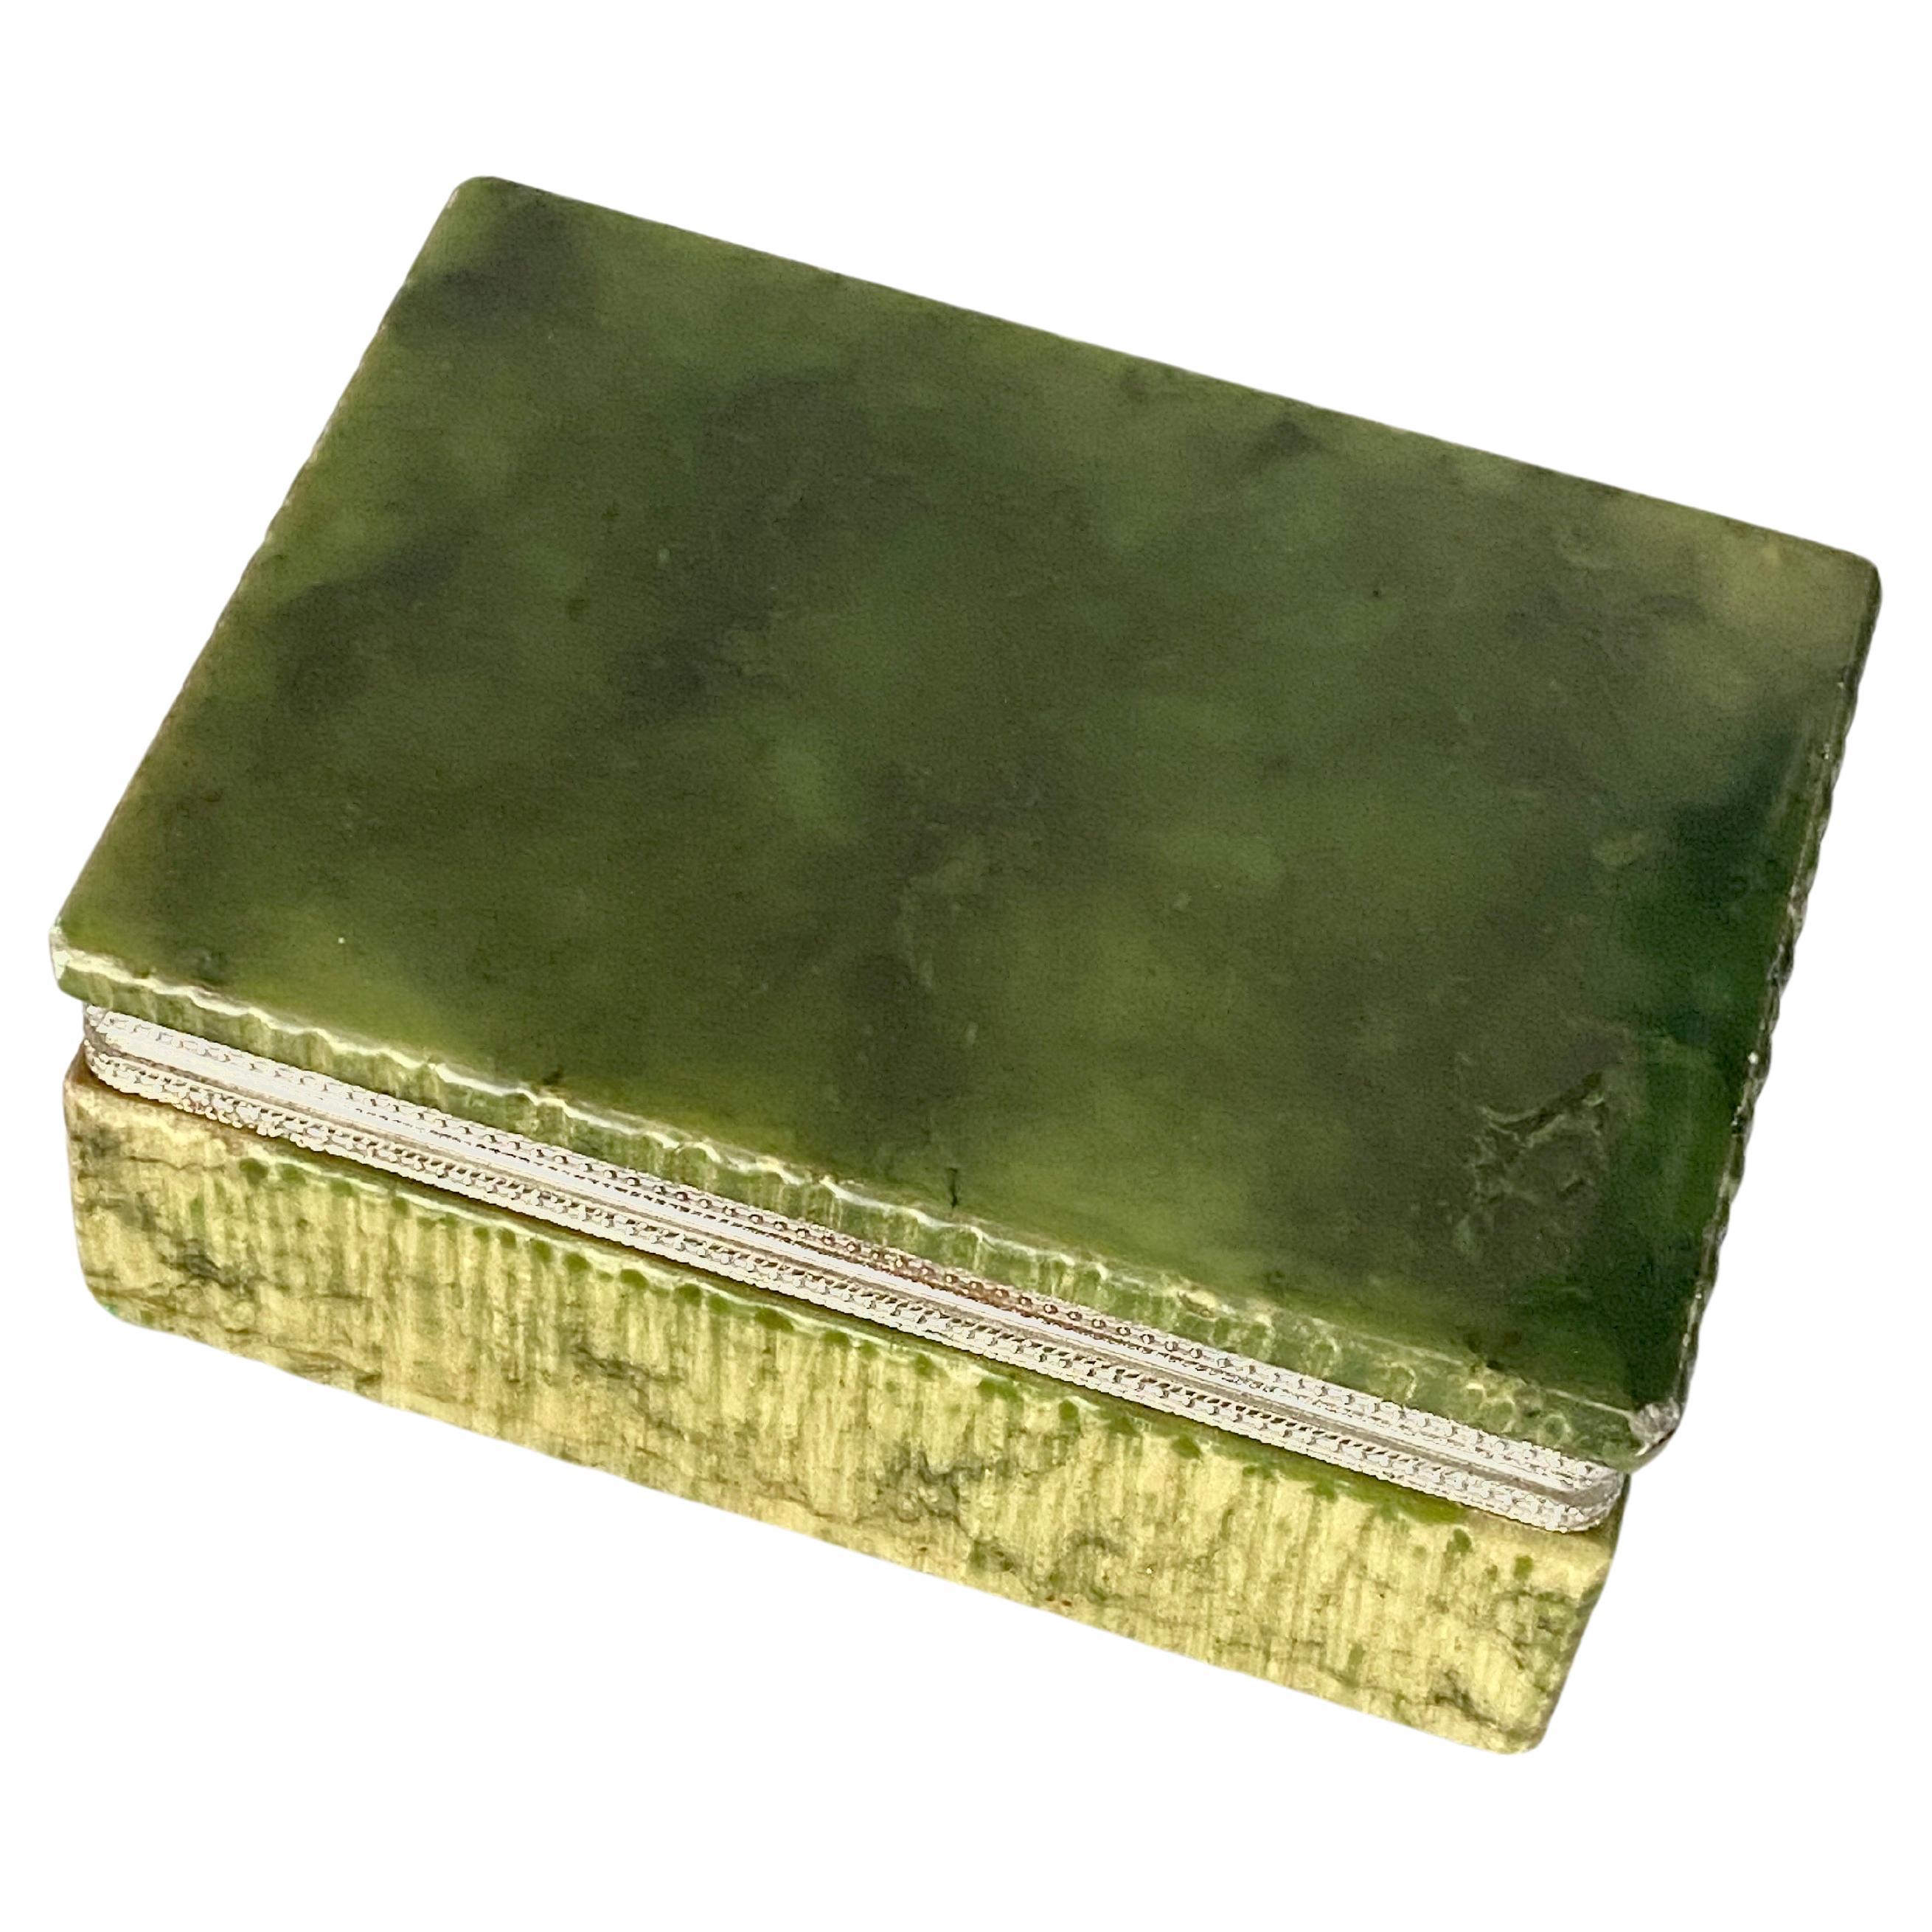 Onyx Box, Decorative, or Jewelry Box, Made in Italy circa 1970 For Sale